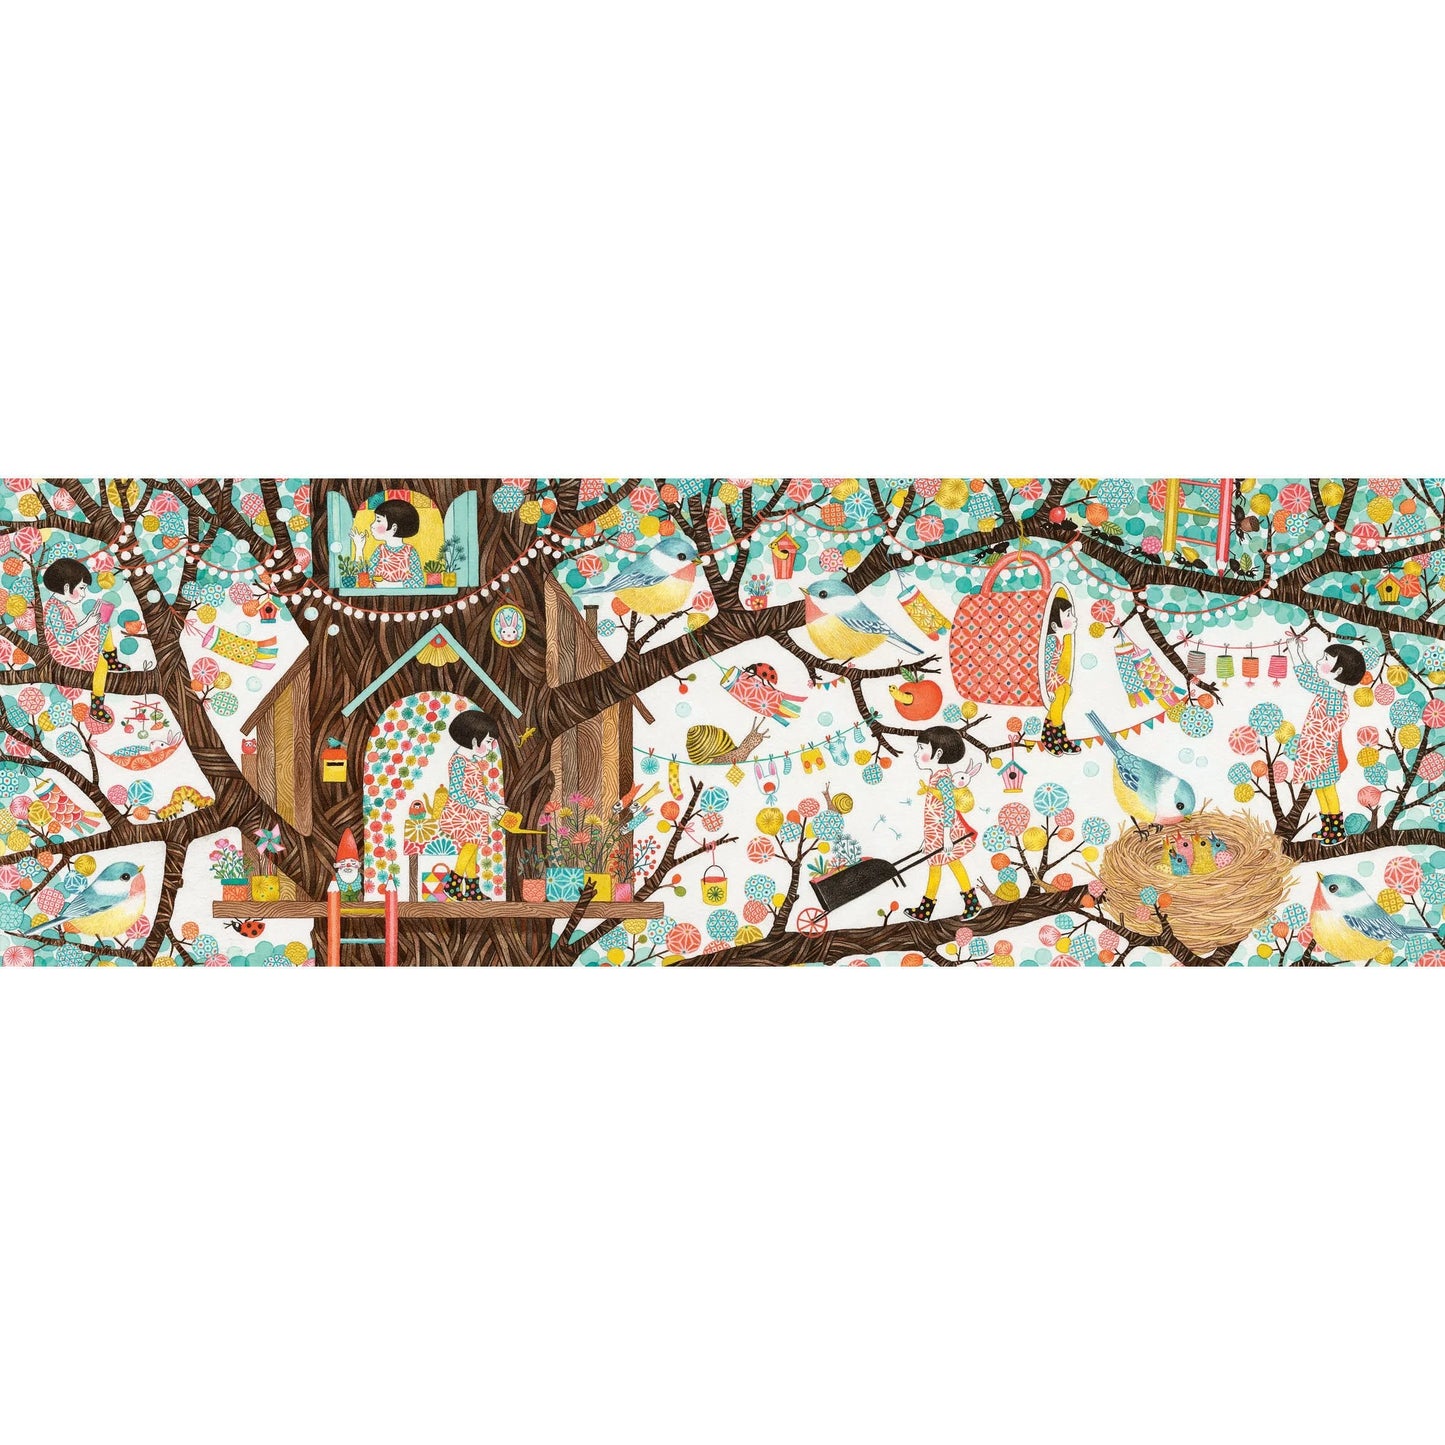 Treehouse | 100 Piece Gallery Jigsaw Puzzle